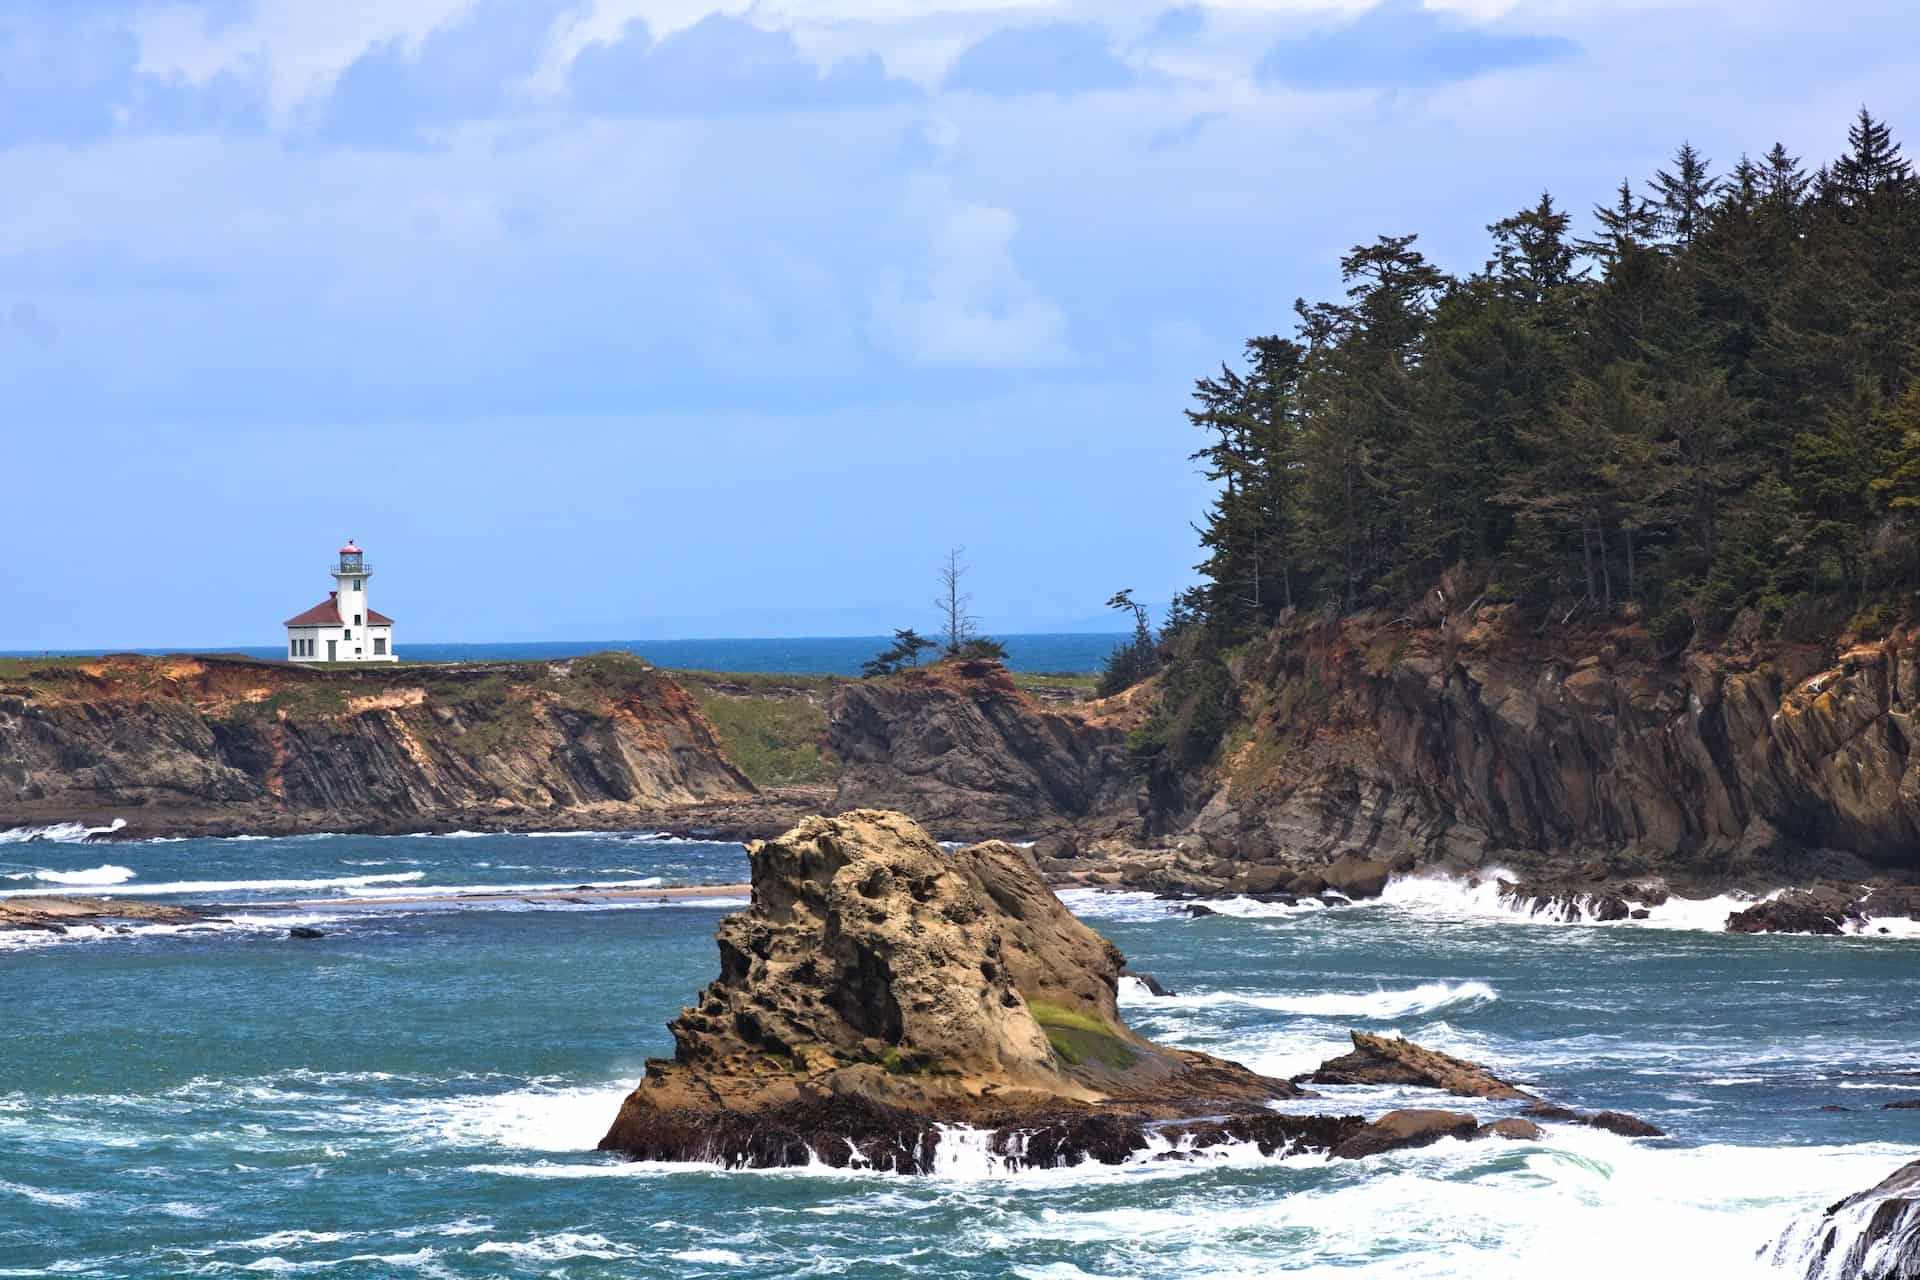 historic lighthouse on secluded rock along rocky coastline of the ocean